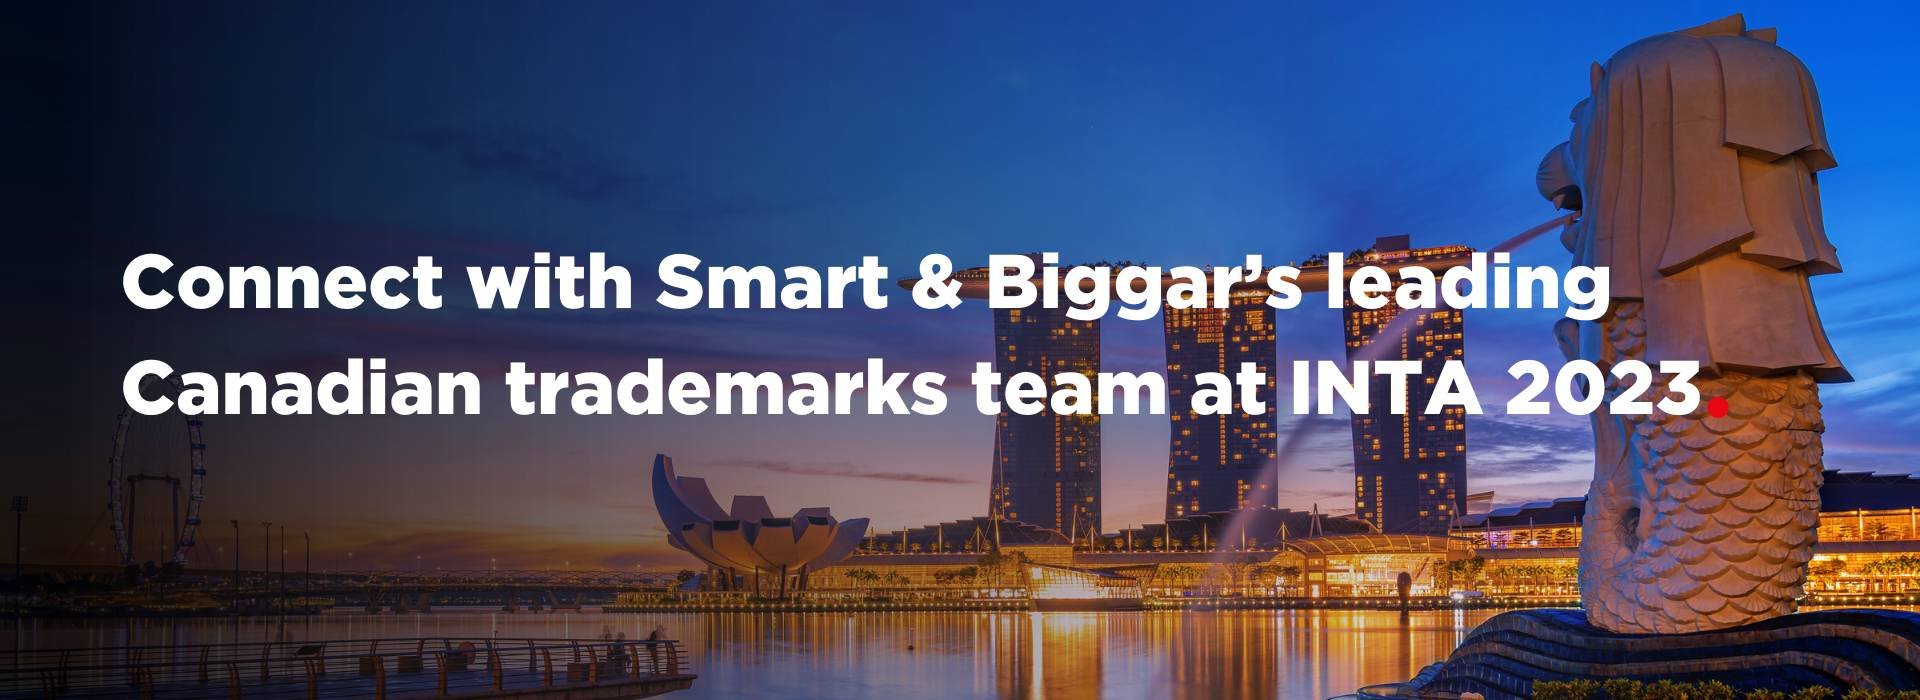 Connect with Smart & Biggar’s leading Canadian trademarks team at INTA 2023